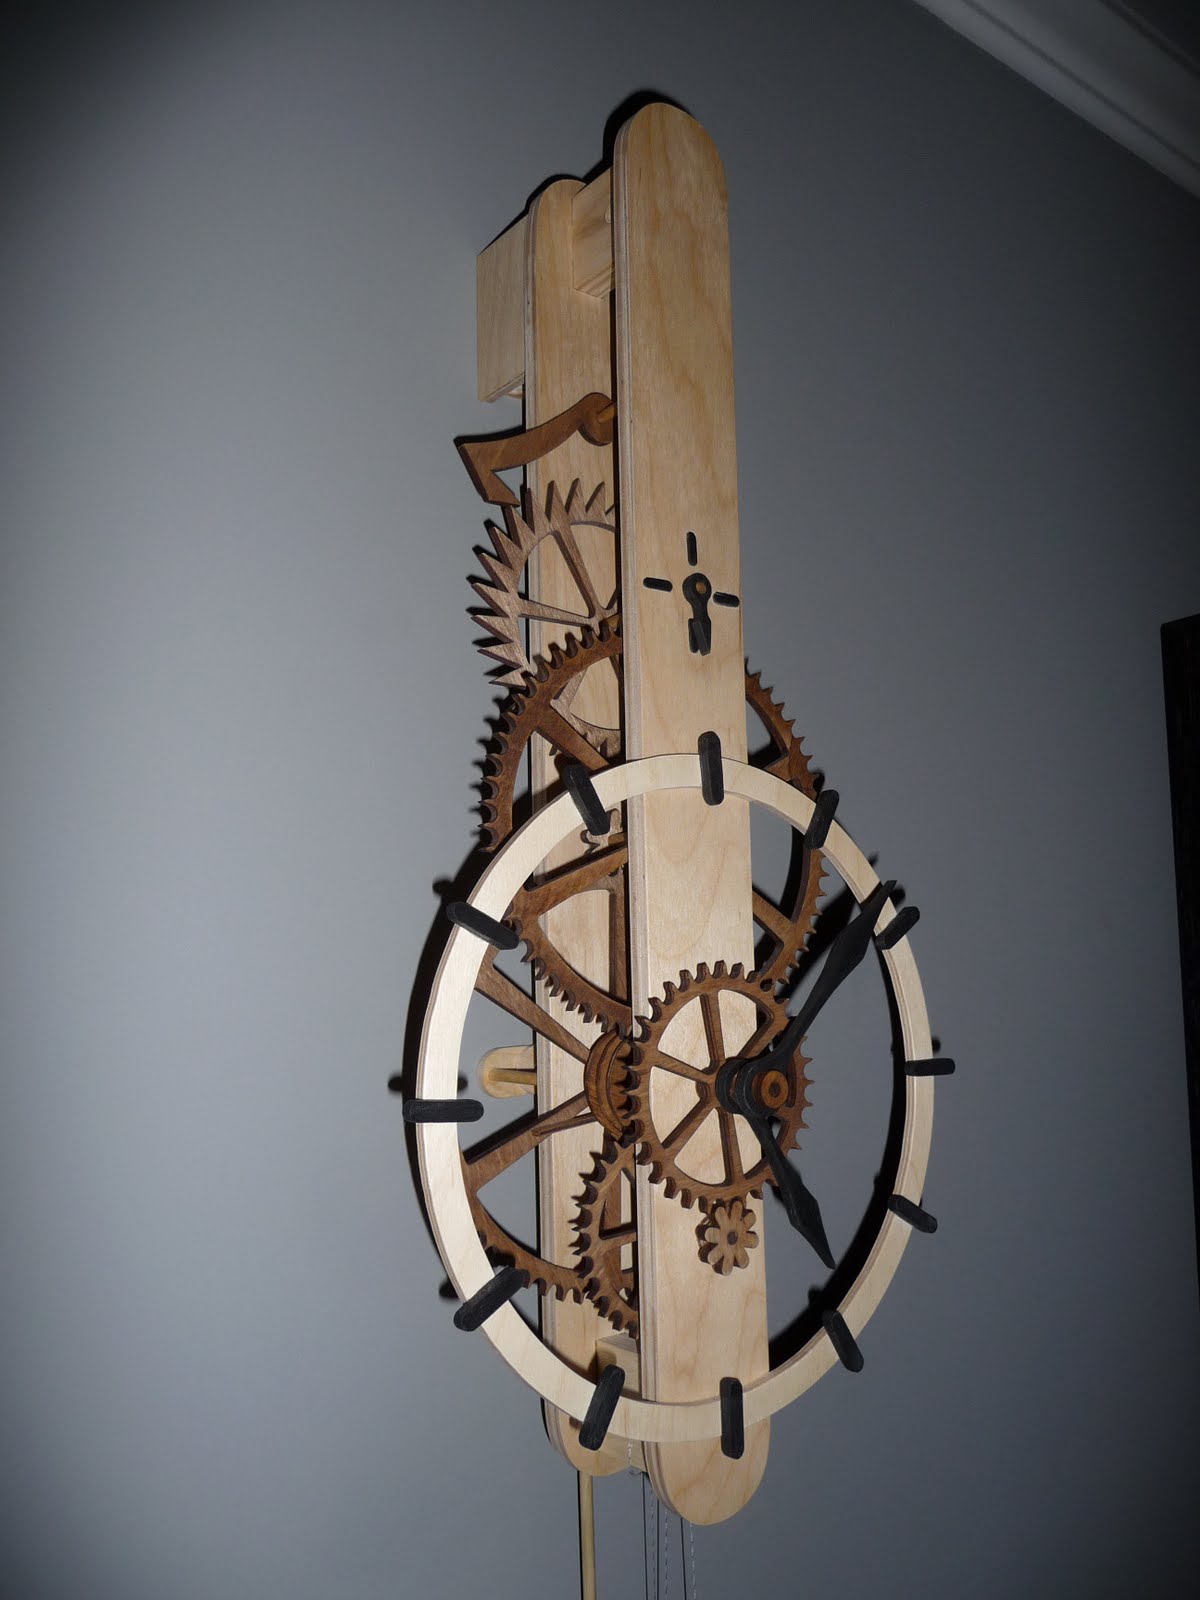 Wooden Gear Clock Kits Easy-To-Follow How To build a DIY ...